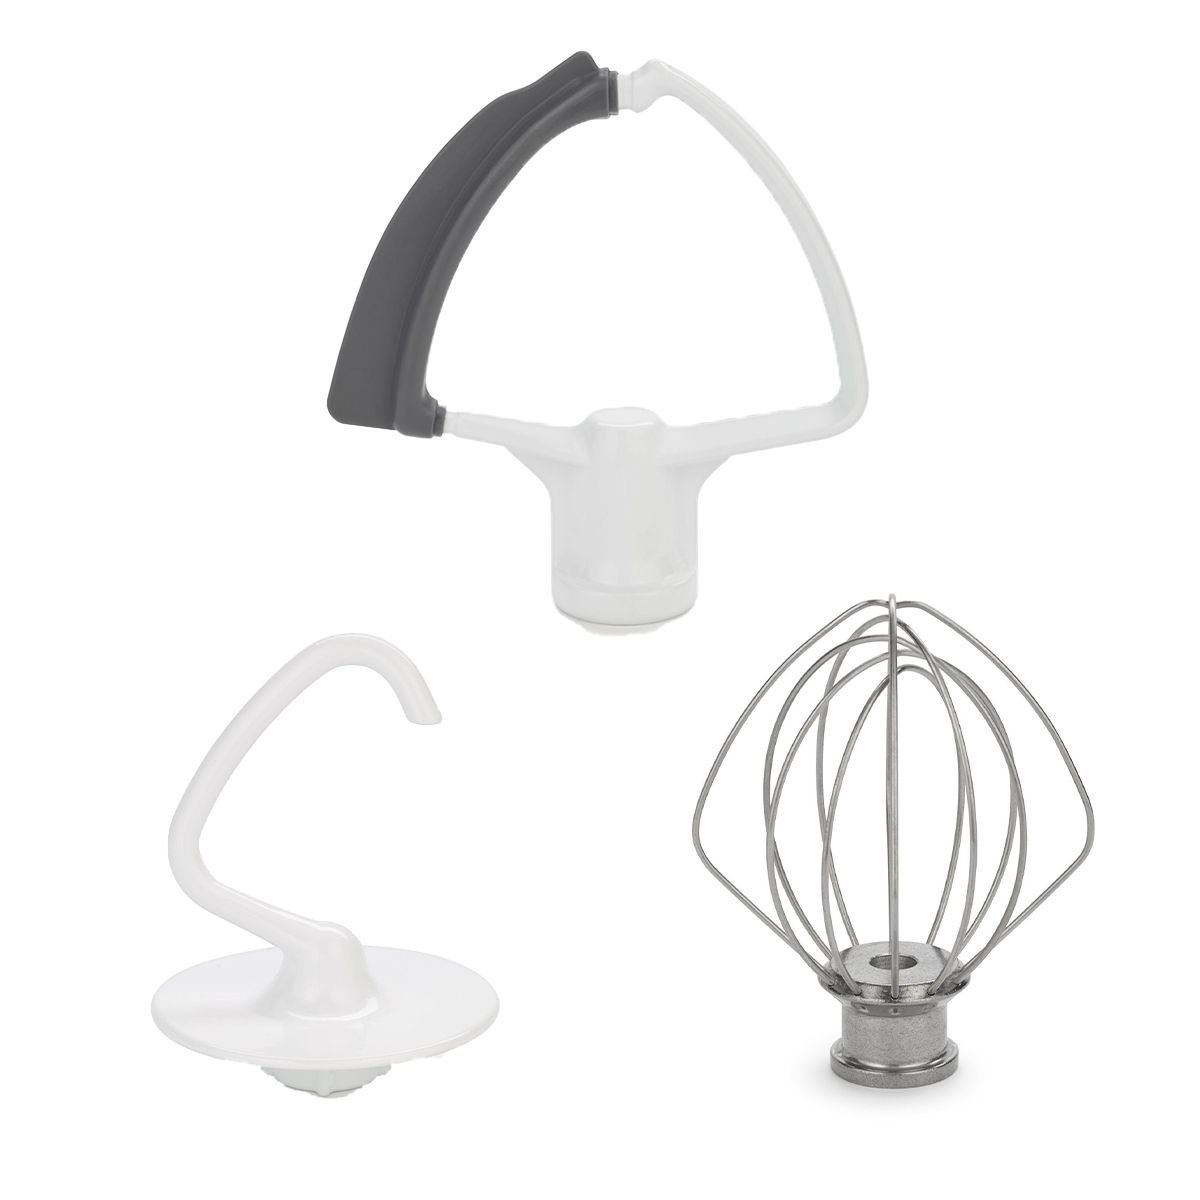 Stainless Steel 6-Wire Whip Attachment for KitchenAid 3.5 Quart Tilt-Head  Stand Mixer KSM3311 and KSM3316, Heavy Duty, Dishwasher Safe, 3.5-Qt Whisk